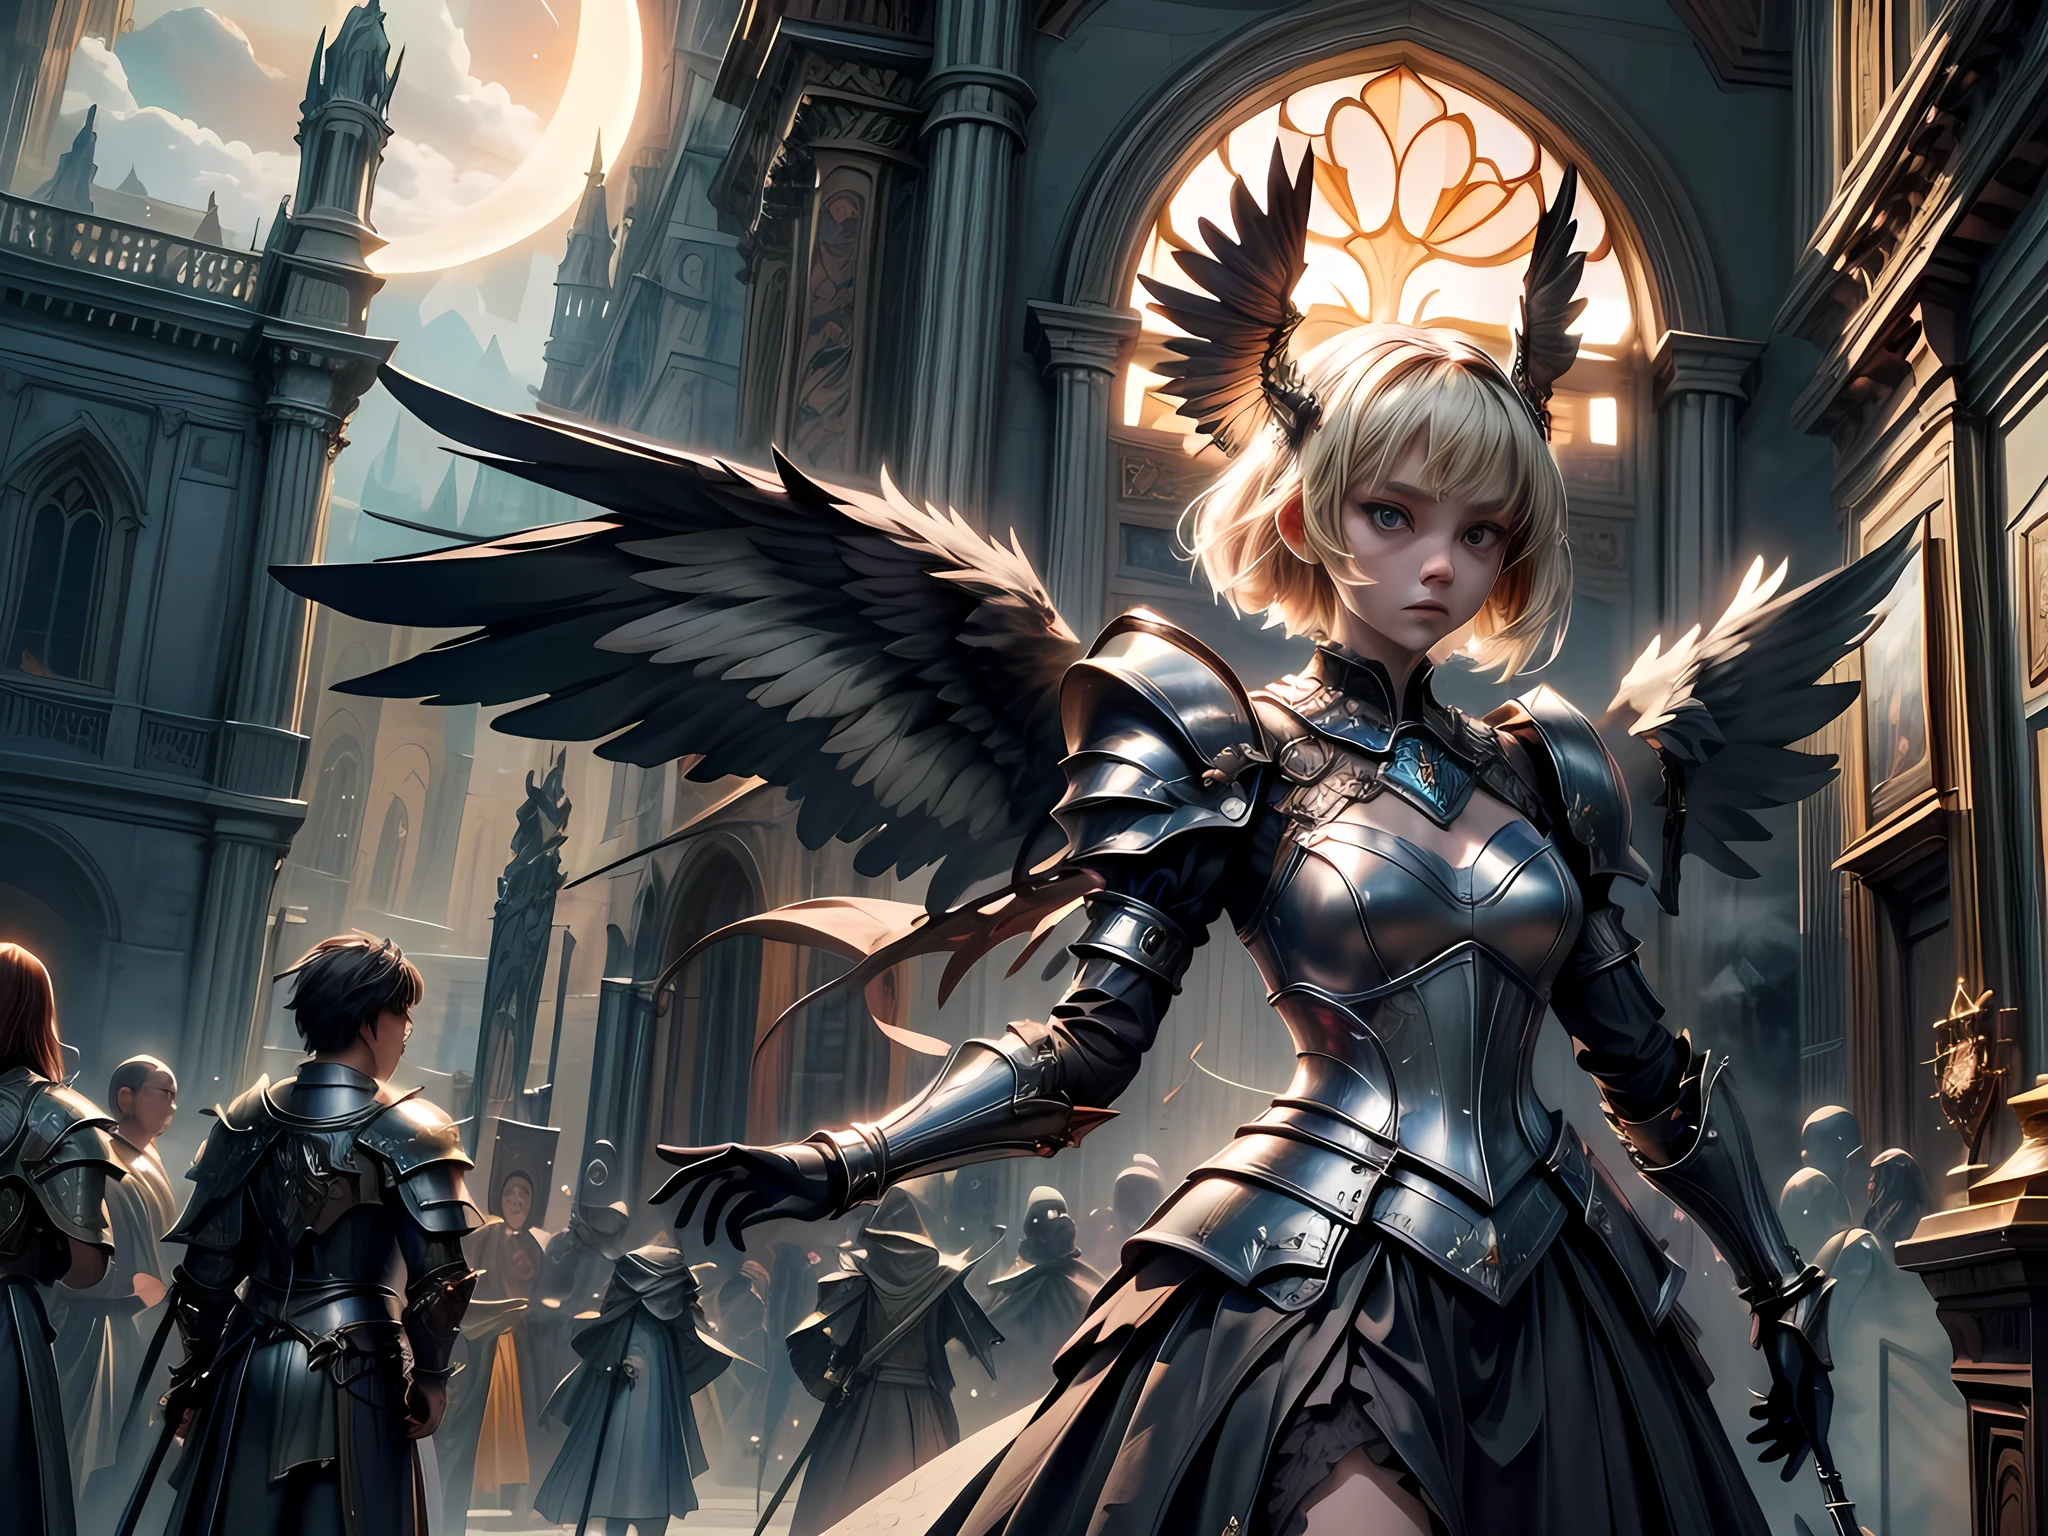 16K, ultra detailed, masterpiece, best quality, (extremely detailed), arafed, dnd art, portrait, full body, aasimar, female, (Masterpiece 1.3, intense details), female, paladin, holy warrior fighting undead (Masterpiece 1.3, intense details) large angelic wings, white angelic wings spread (Masterpiece 1.3, intense details), dark fantasy cemetery background, moon light, moon, stars, clouds, wearing (white: 1.1) armor (Masterpiece 1.3, intense details), holy symbol, armed with sword, short blond hair, detailed face, (Masterpiece 1.5, best quality), anatomically correct (Masterpiece 1.3, intense details), angel_wings, determined face, god rays, cinematic lighting, glowing light, silhouette, from outside, photorealism, panoramic view (Masterpiece 1.3, intense details) , Wide-Angle, Ultra-Wide Angle, 8k, highres, best quality, high details, armored dress, landing_wings